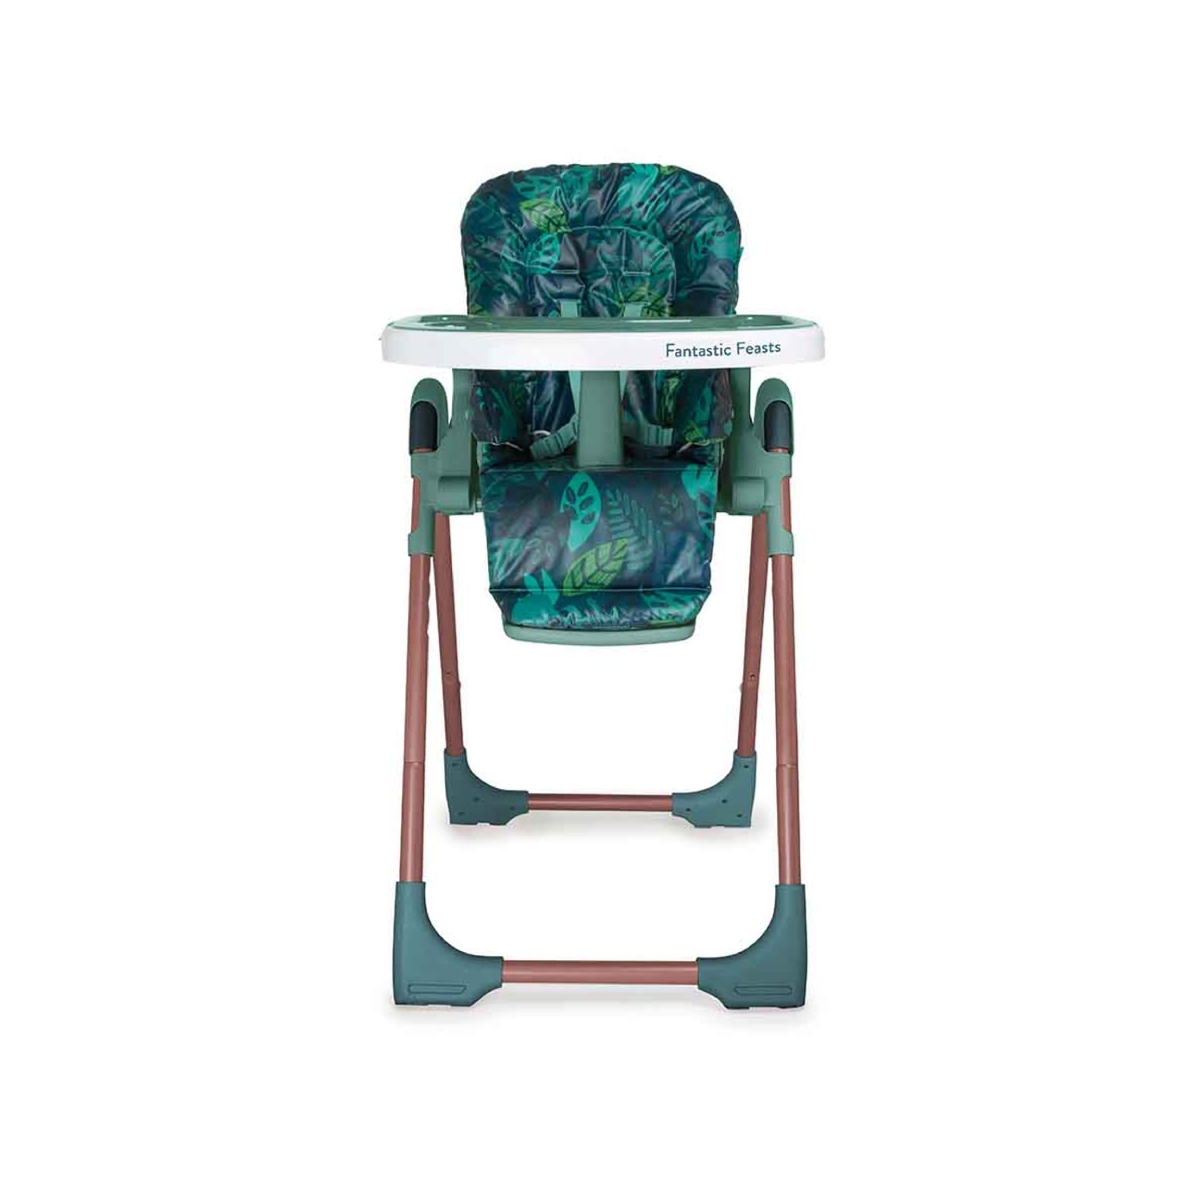 Cosatto Noodle 0+ Highchair